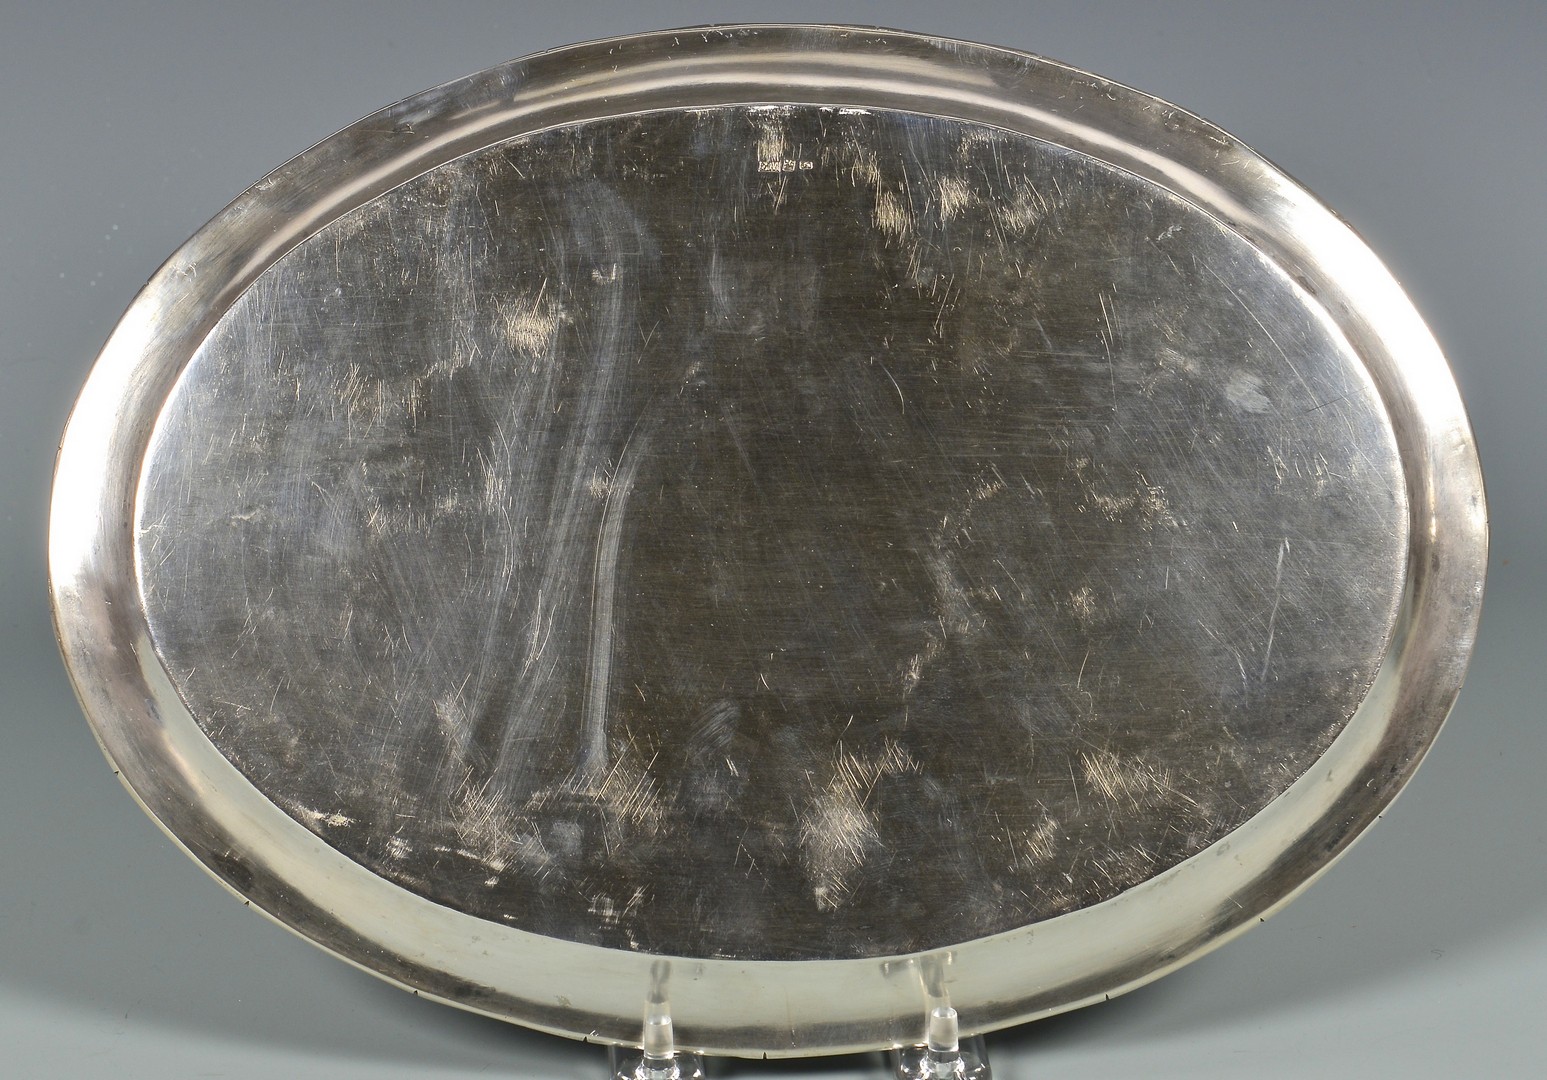 Lot 33: Chinese Silver Cocktail Shaker and Tray